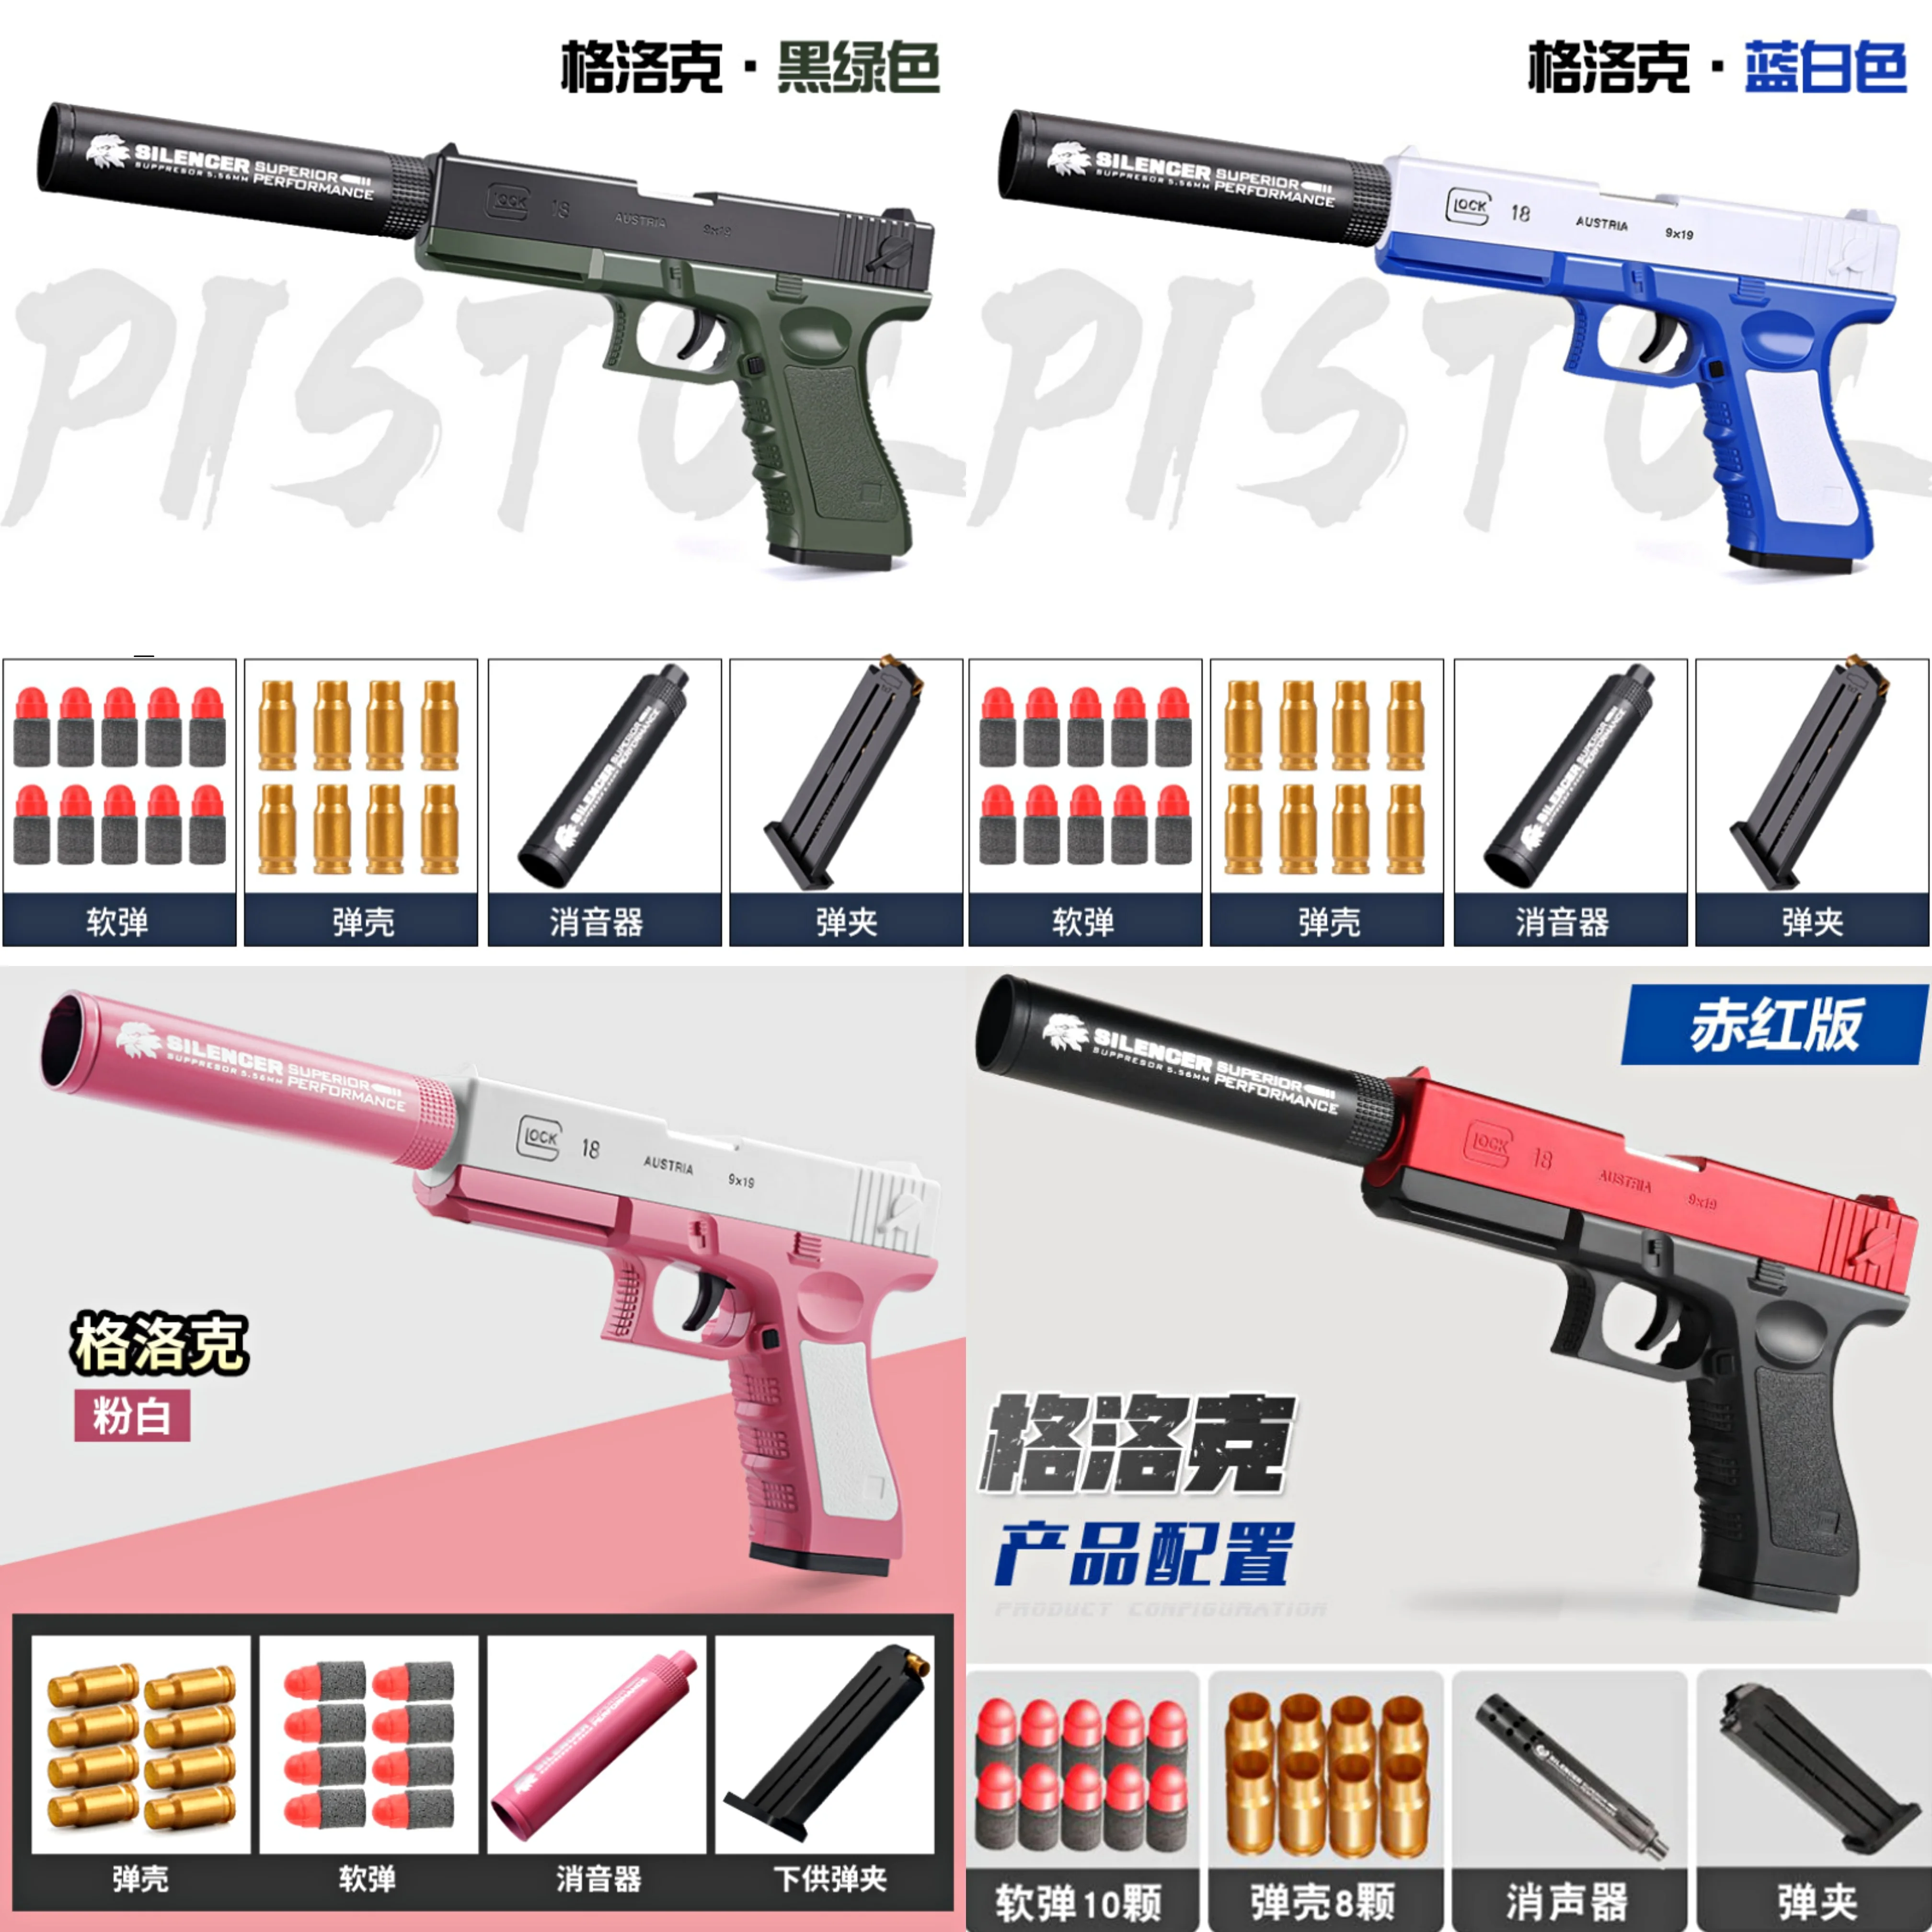 Shell Ejection Soft Bullet Toy Gun,Toy Guns That Look Real,Manual Loading Safe Soft Bullet Gun